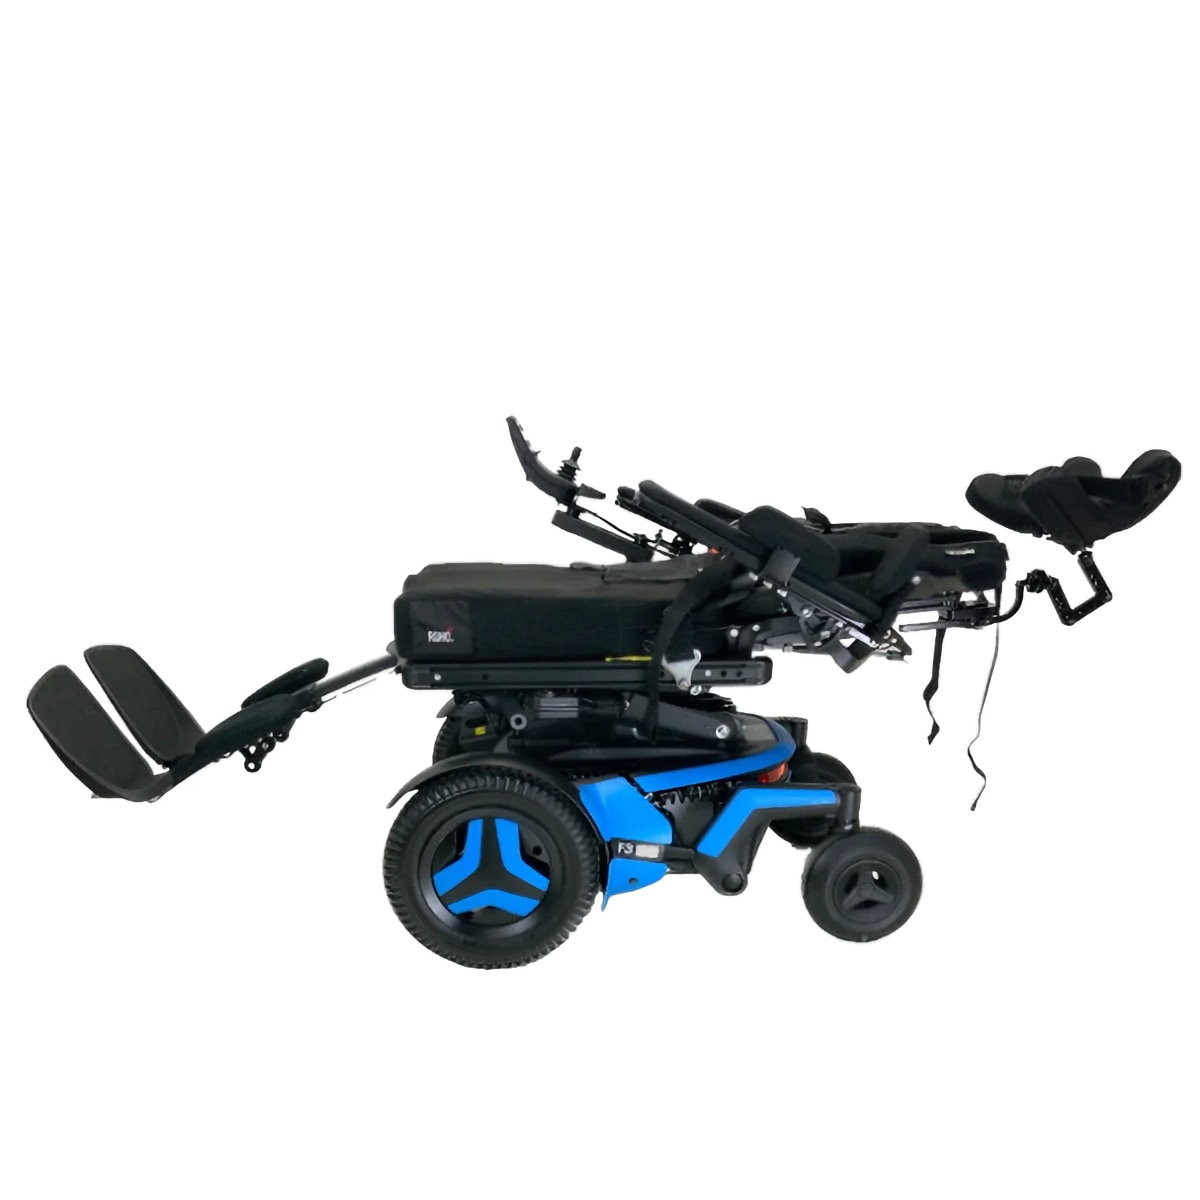 Permobil F3 complex rehab wheelchair with blue accents in recline position